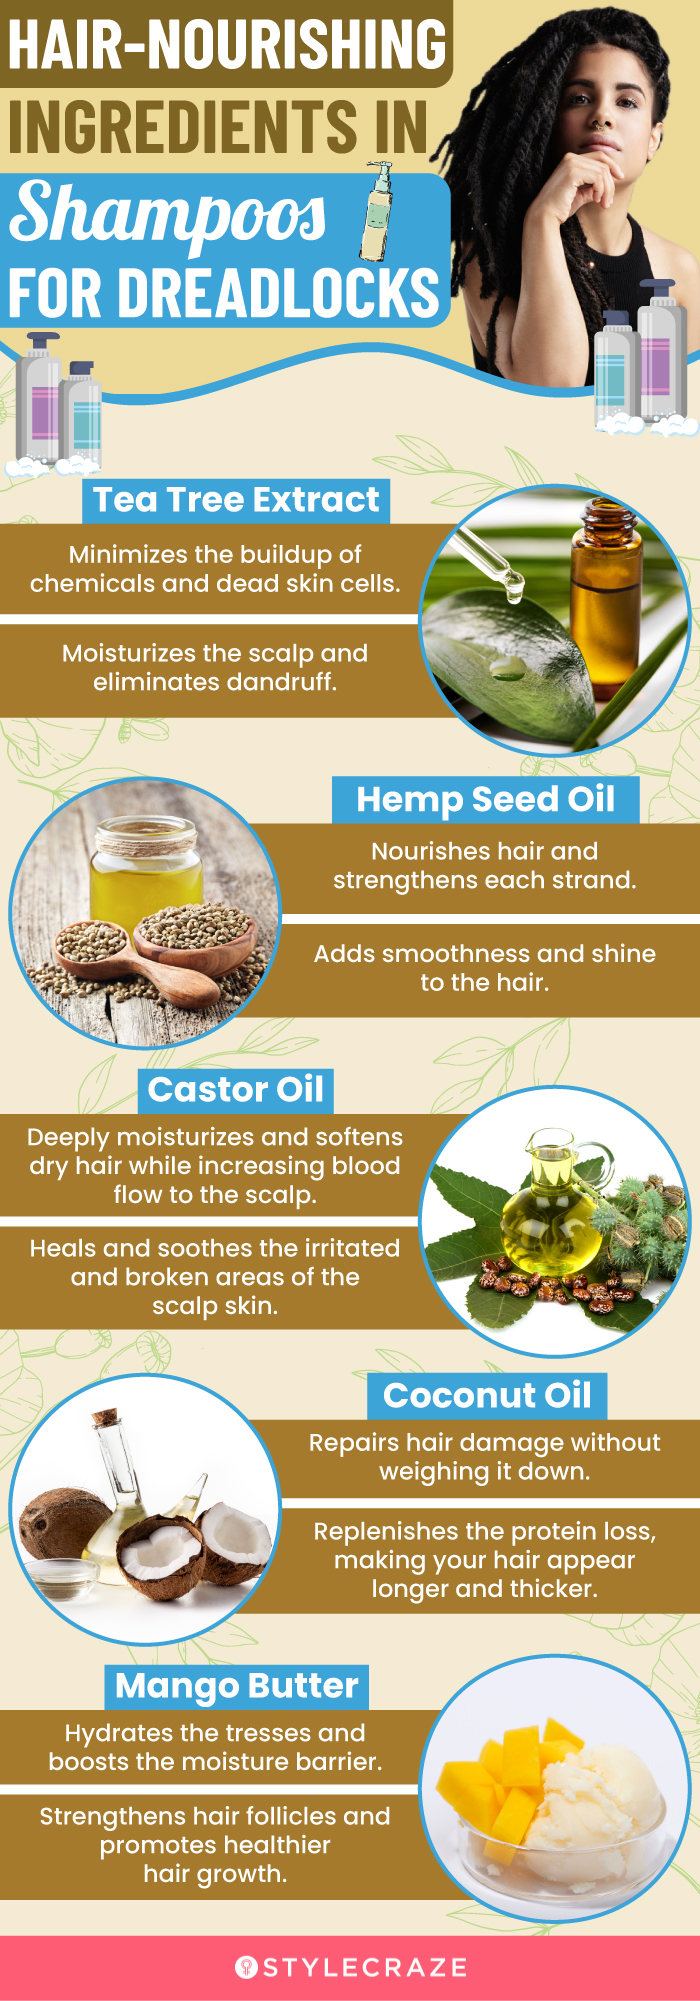 Hair-Nourishing Ingredients In Shampoos For Dreadlocks (infographic)